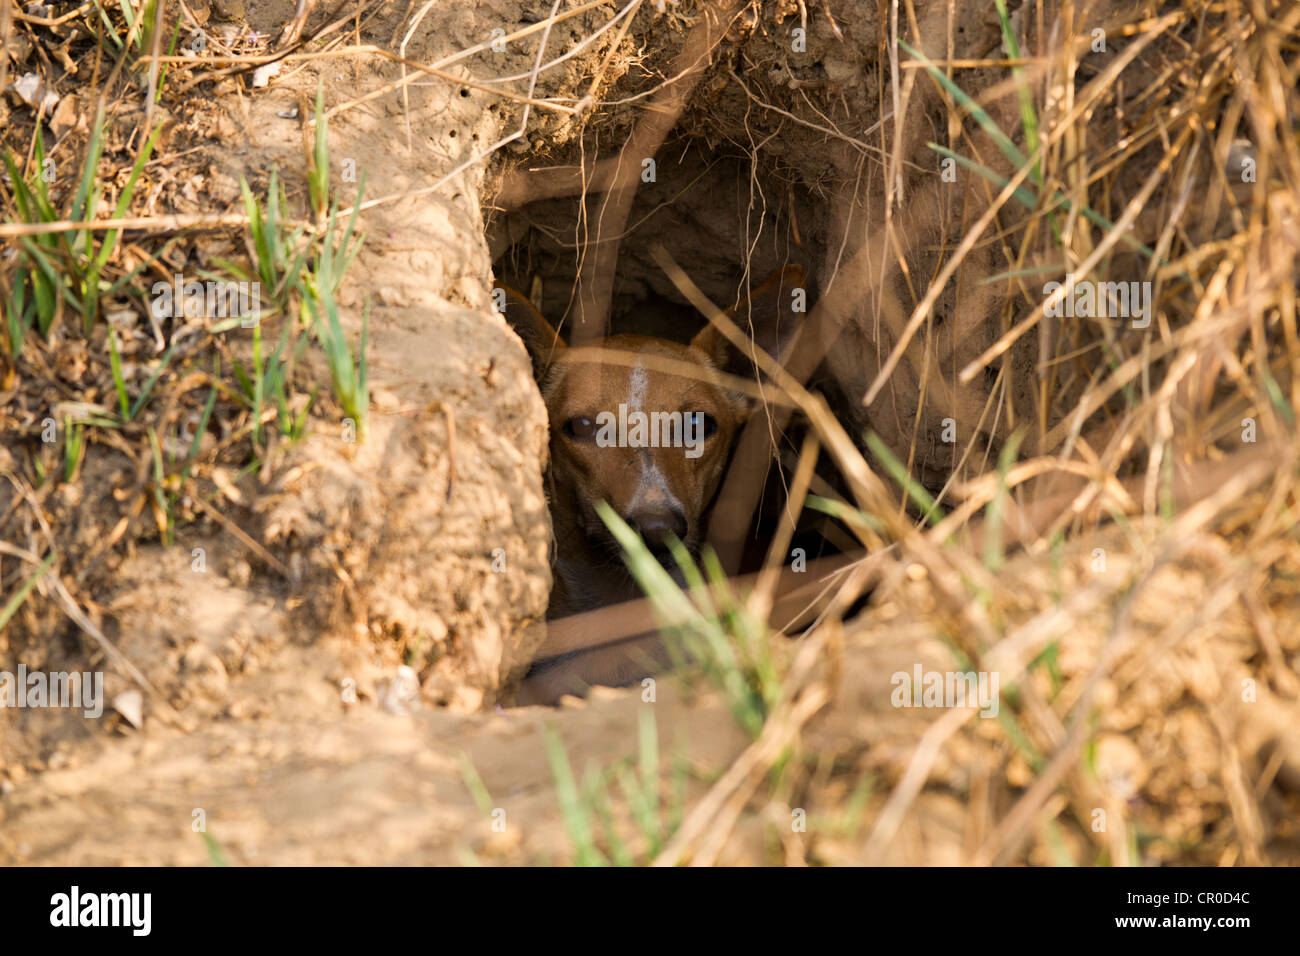 A feral dog in a hole rearing pups. Stock Photo